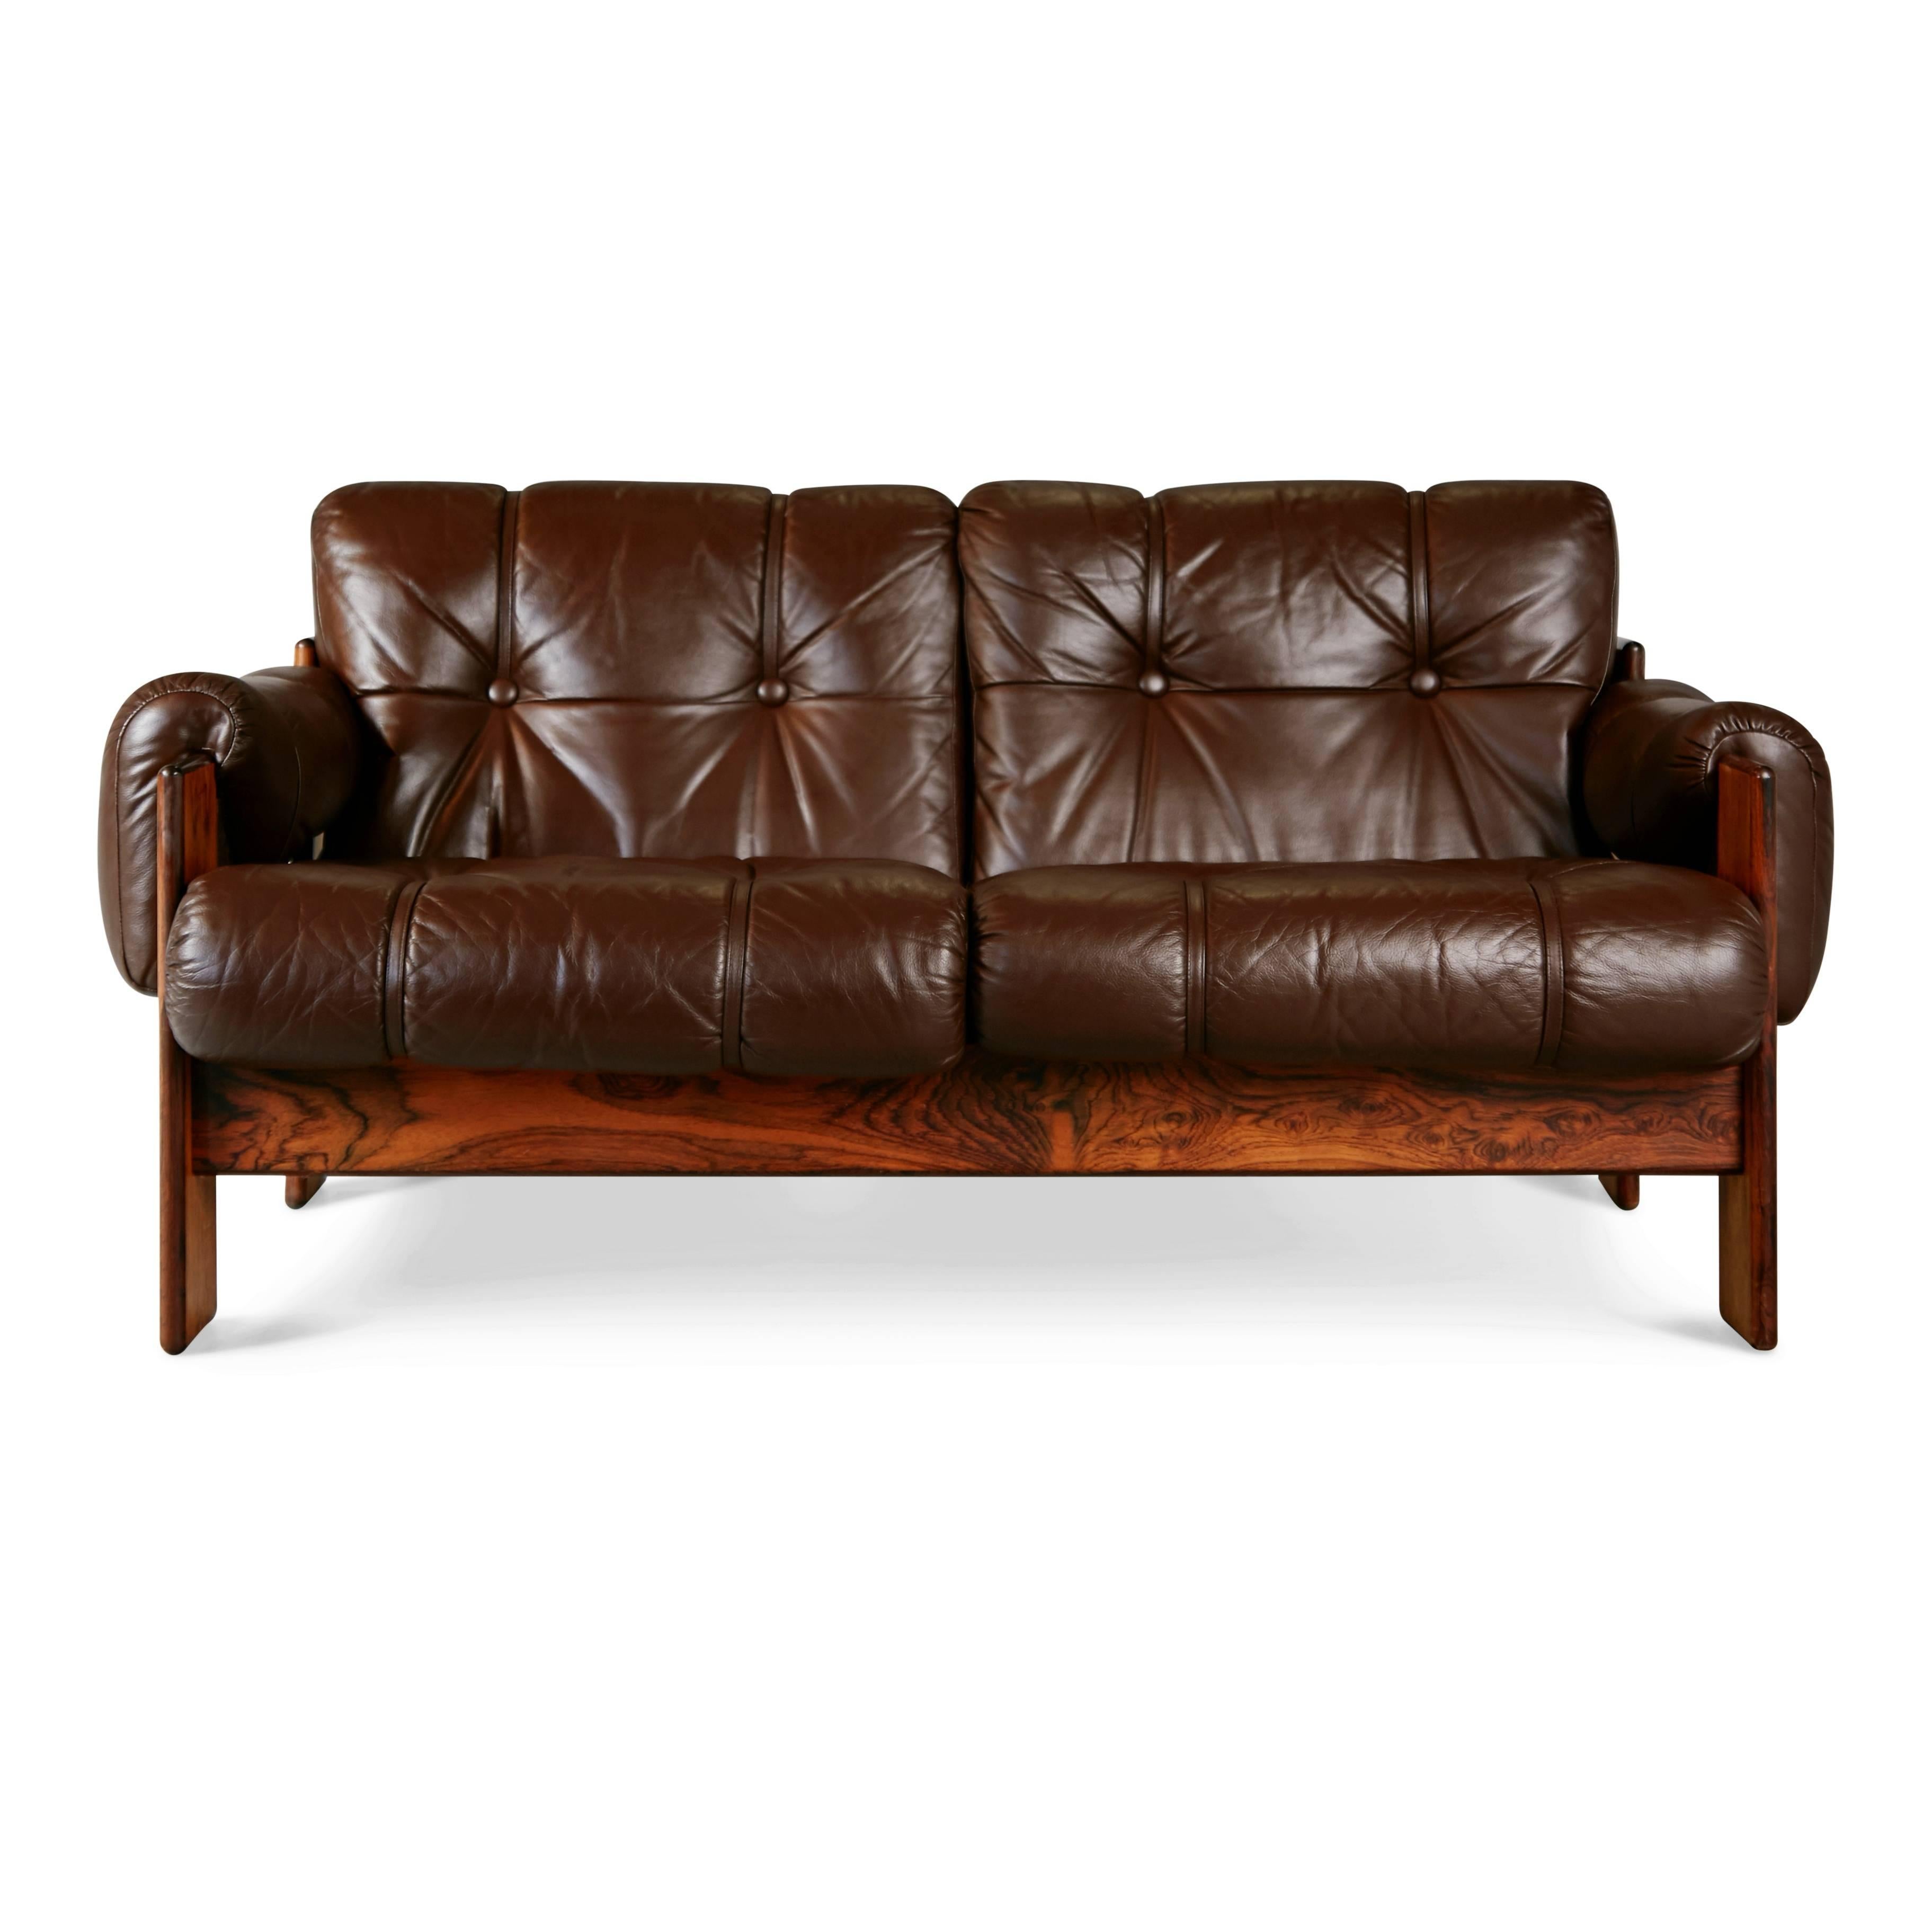 Wonderful loveseat by Kalustekiila, Finland. Featuring the original high quality tufted leather upholstery which has expertly cleaned and conditioned to the original rich brown color while still retaining the vibrant look of vintage leather. The